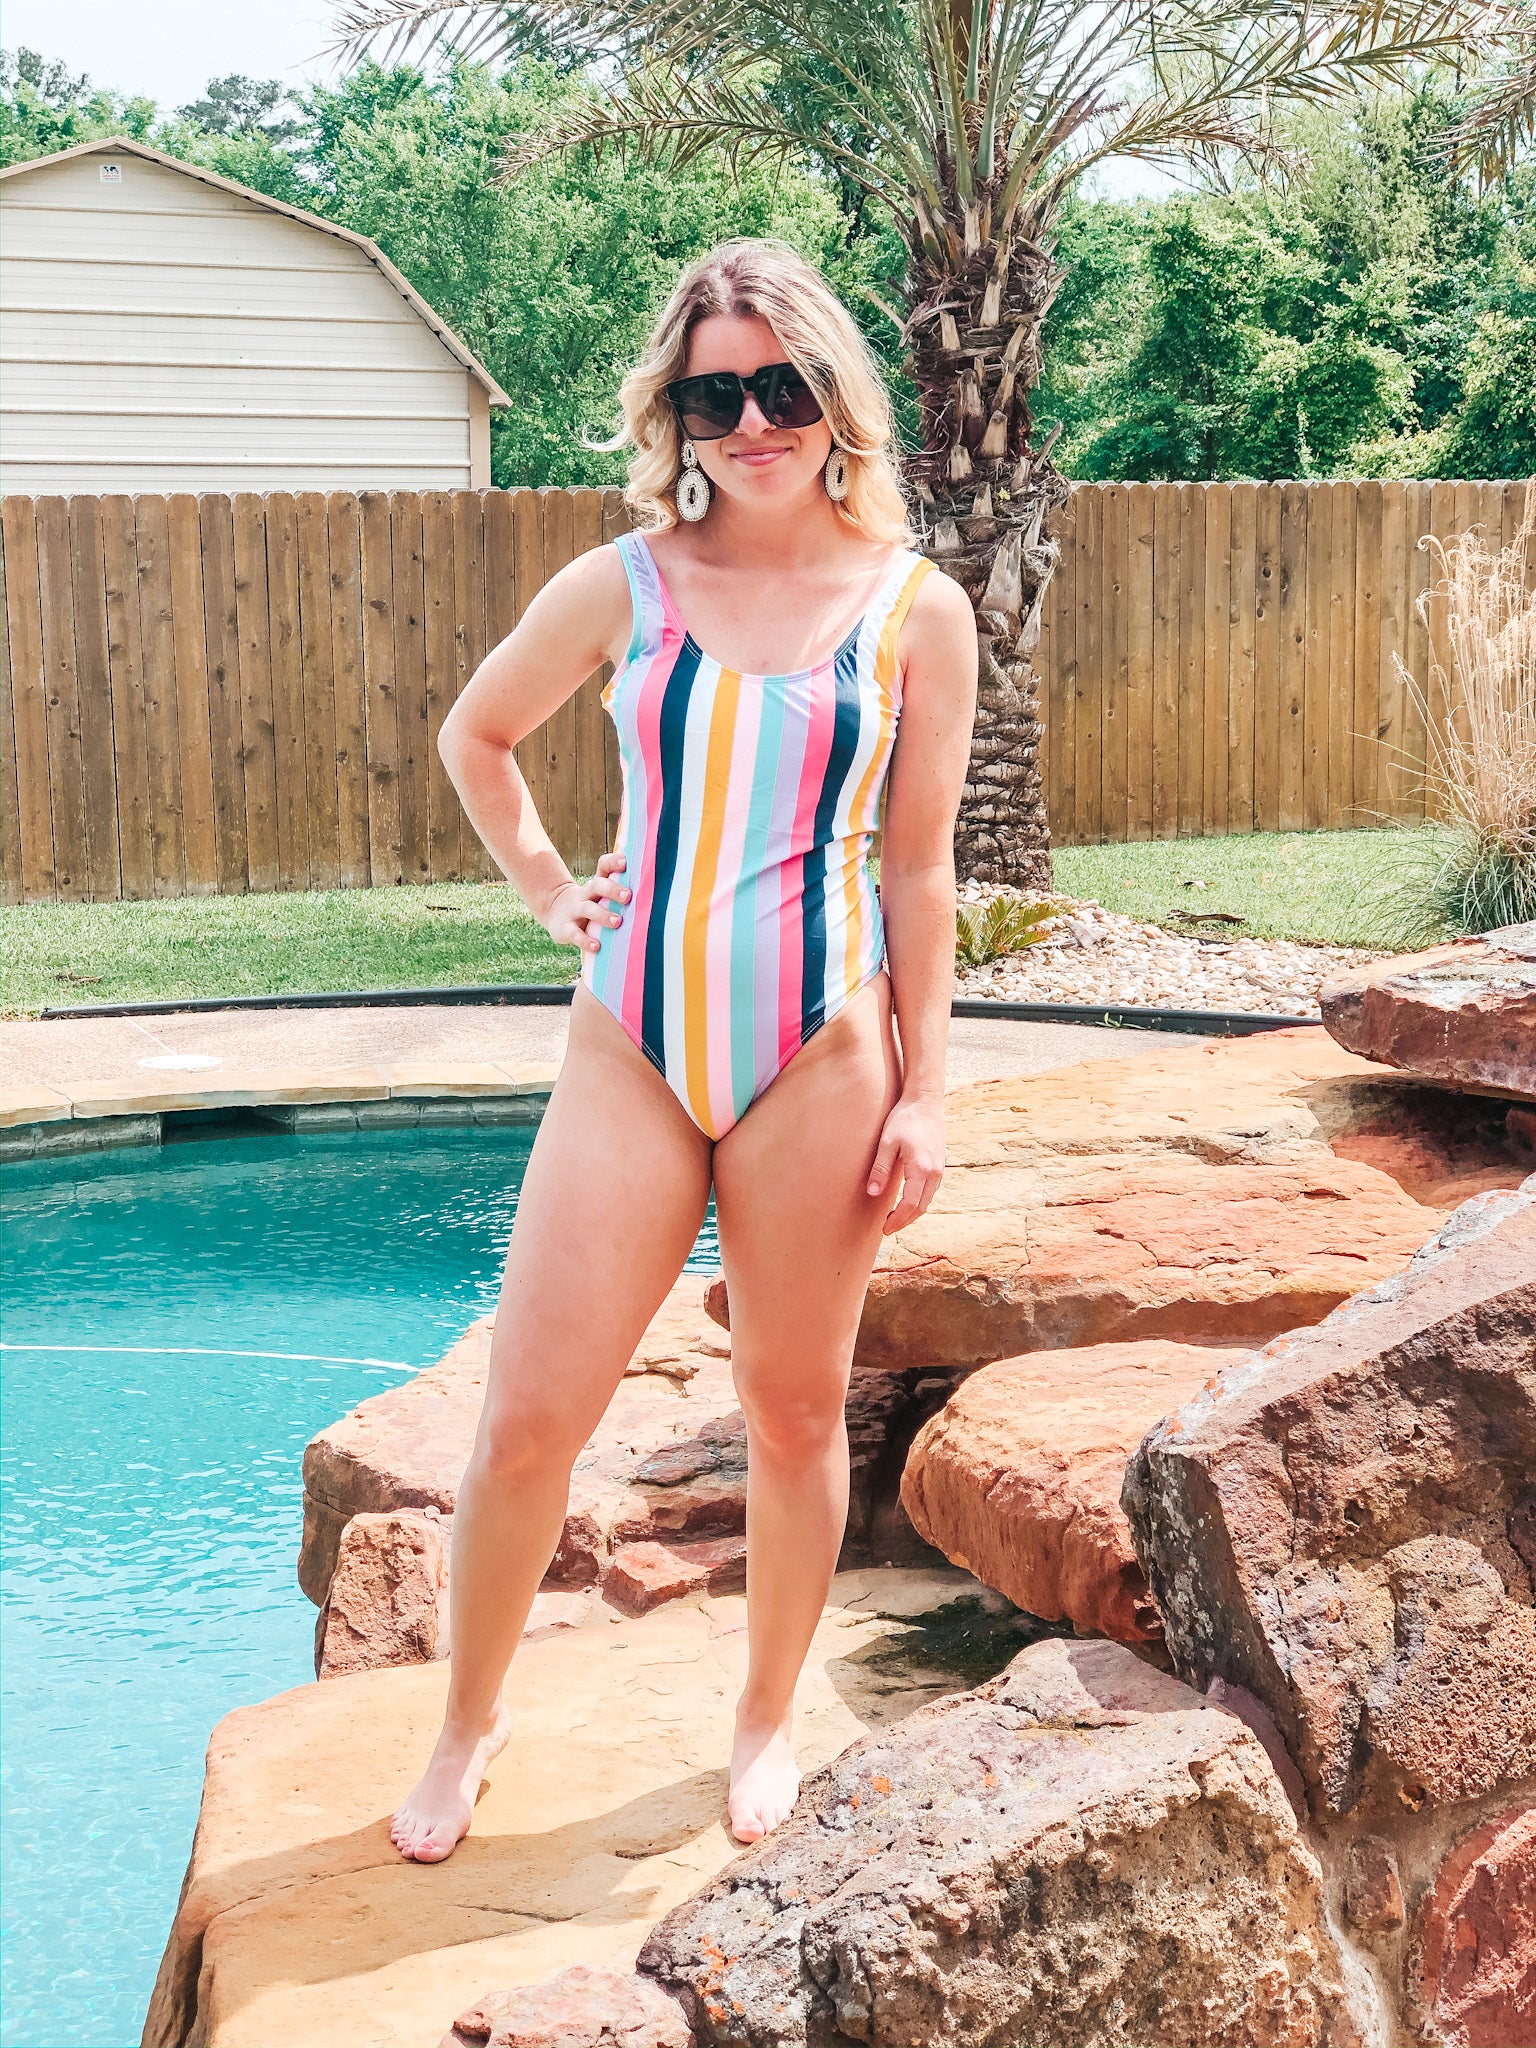 Paradise Pier Striped One Piece Swimsuit with Open Back in Multicolor - Giddy Up Glamour Boutique